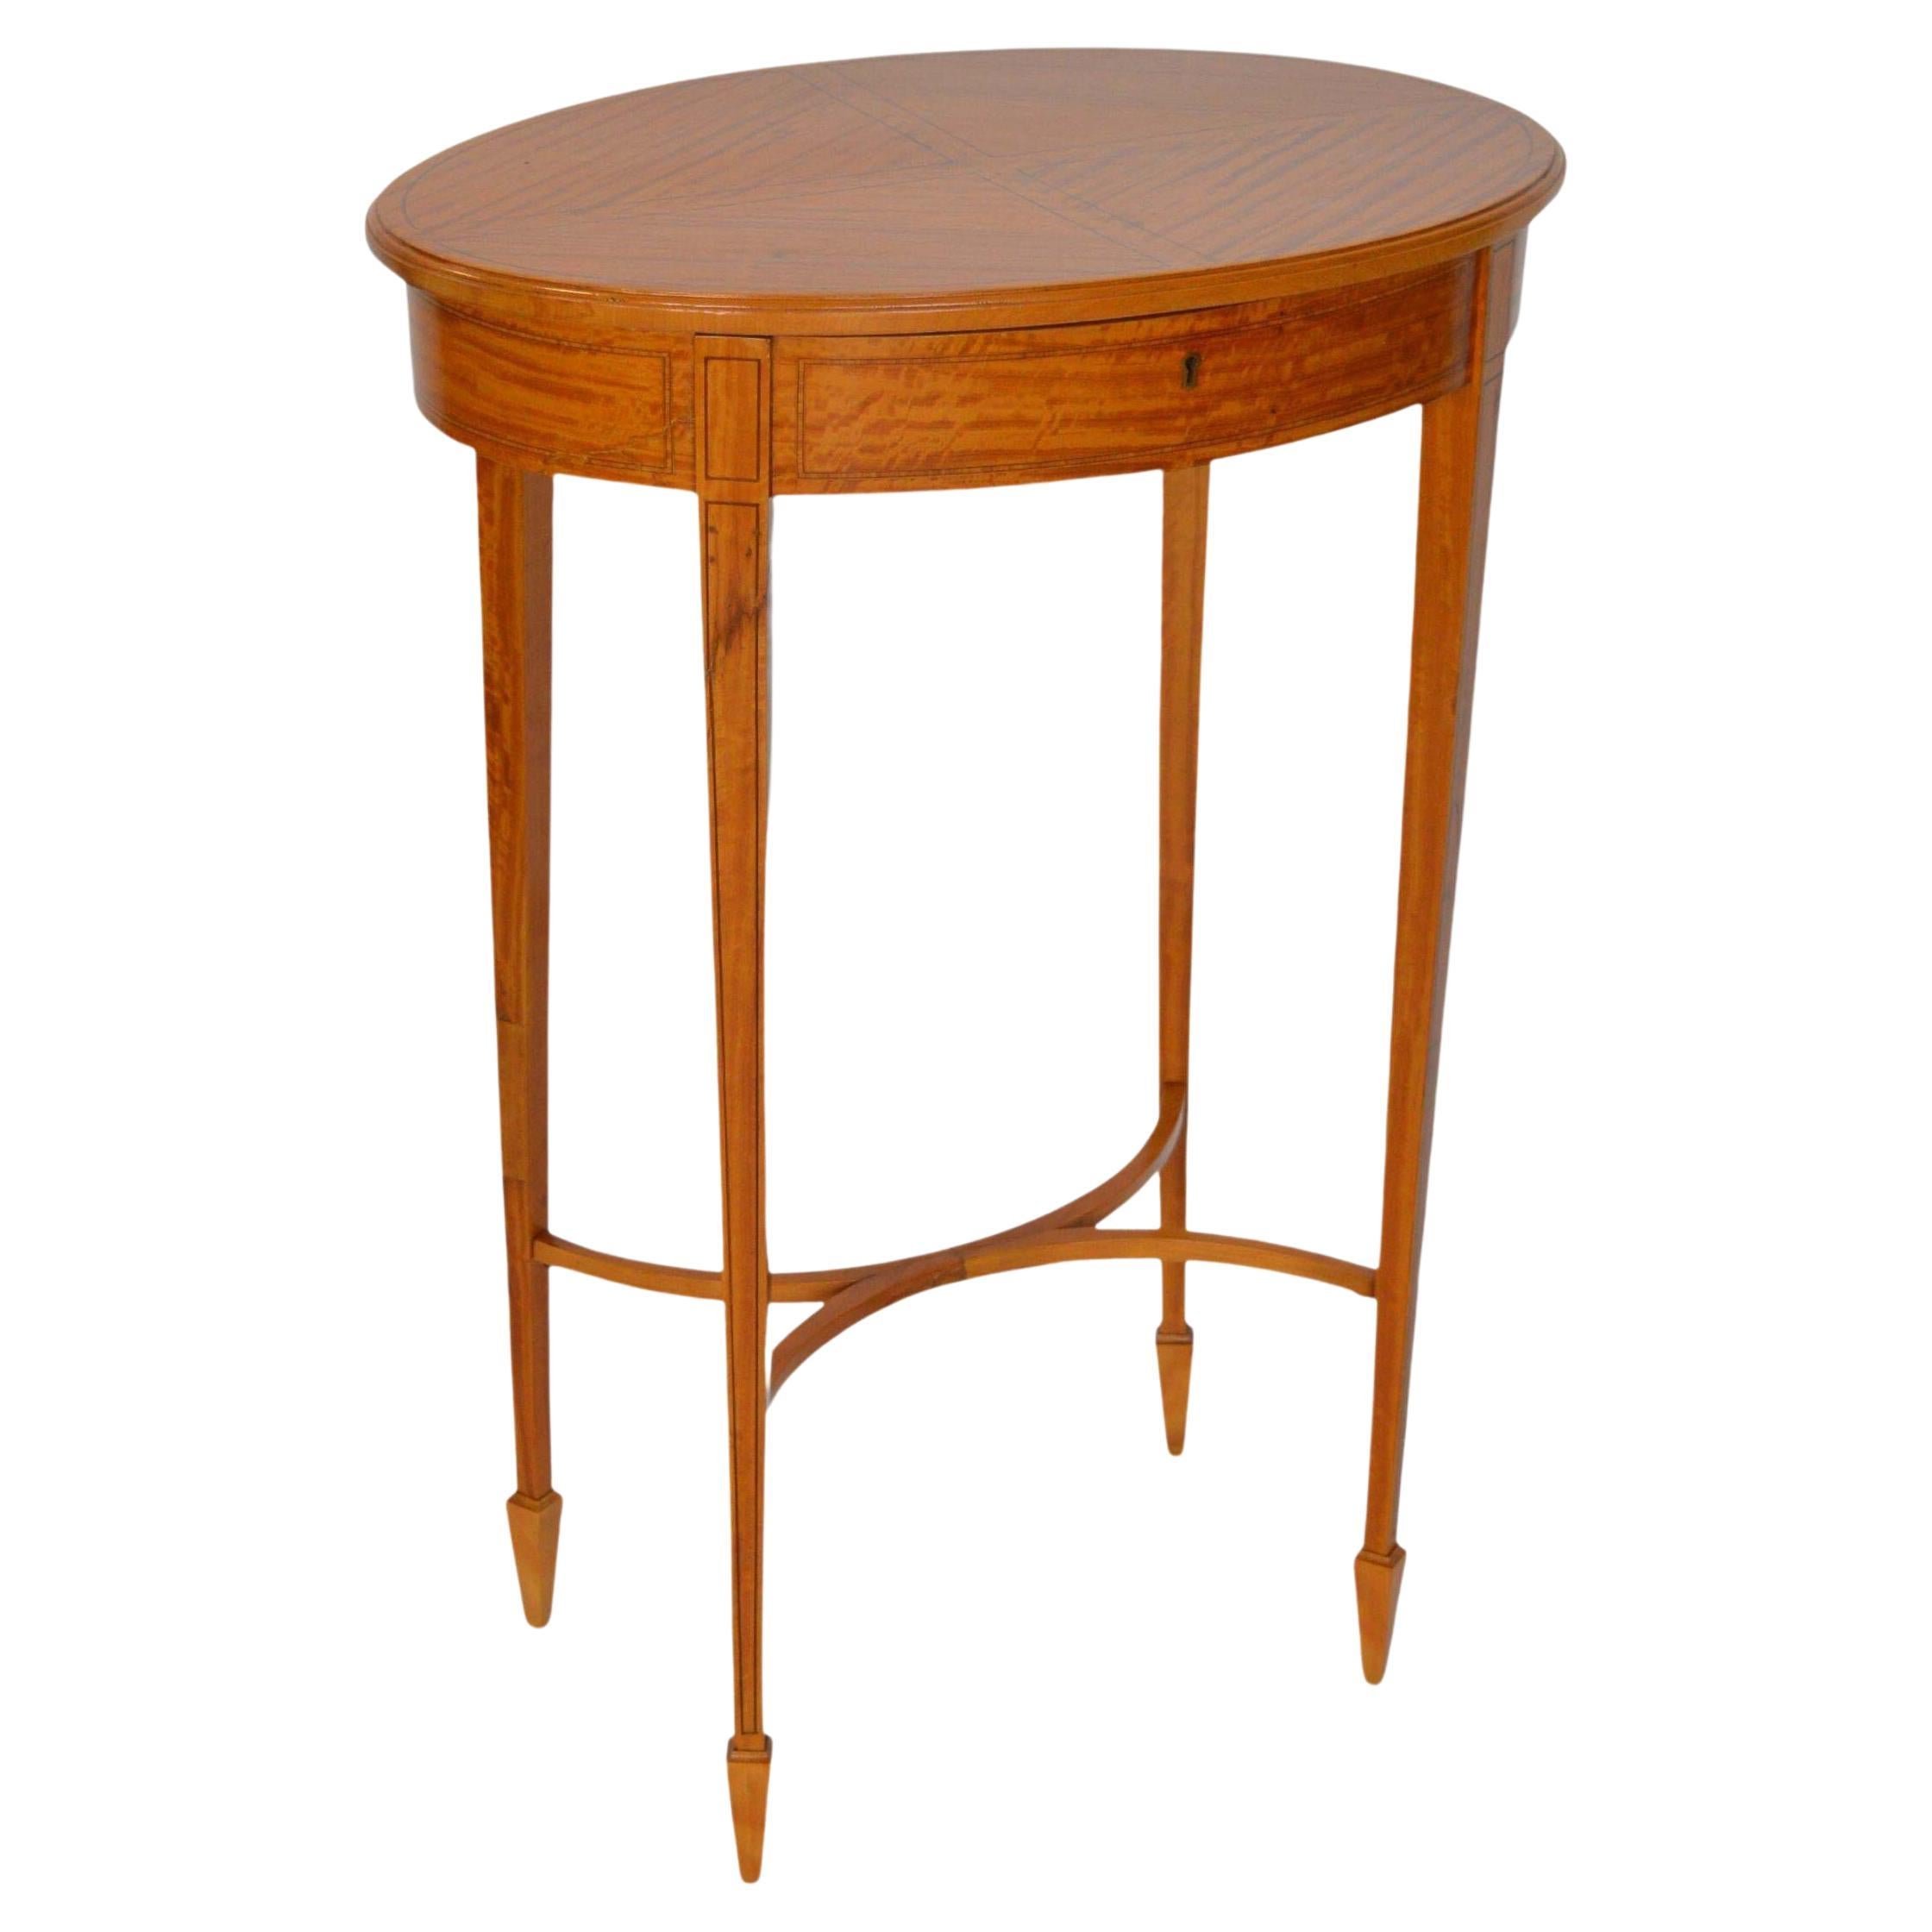 Late 19th Century Oval Satinwood Sewing Table For Sale